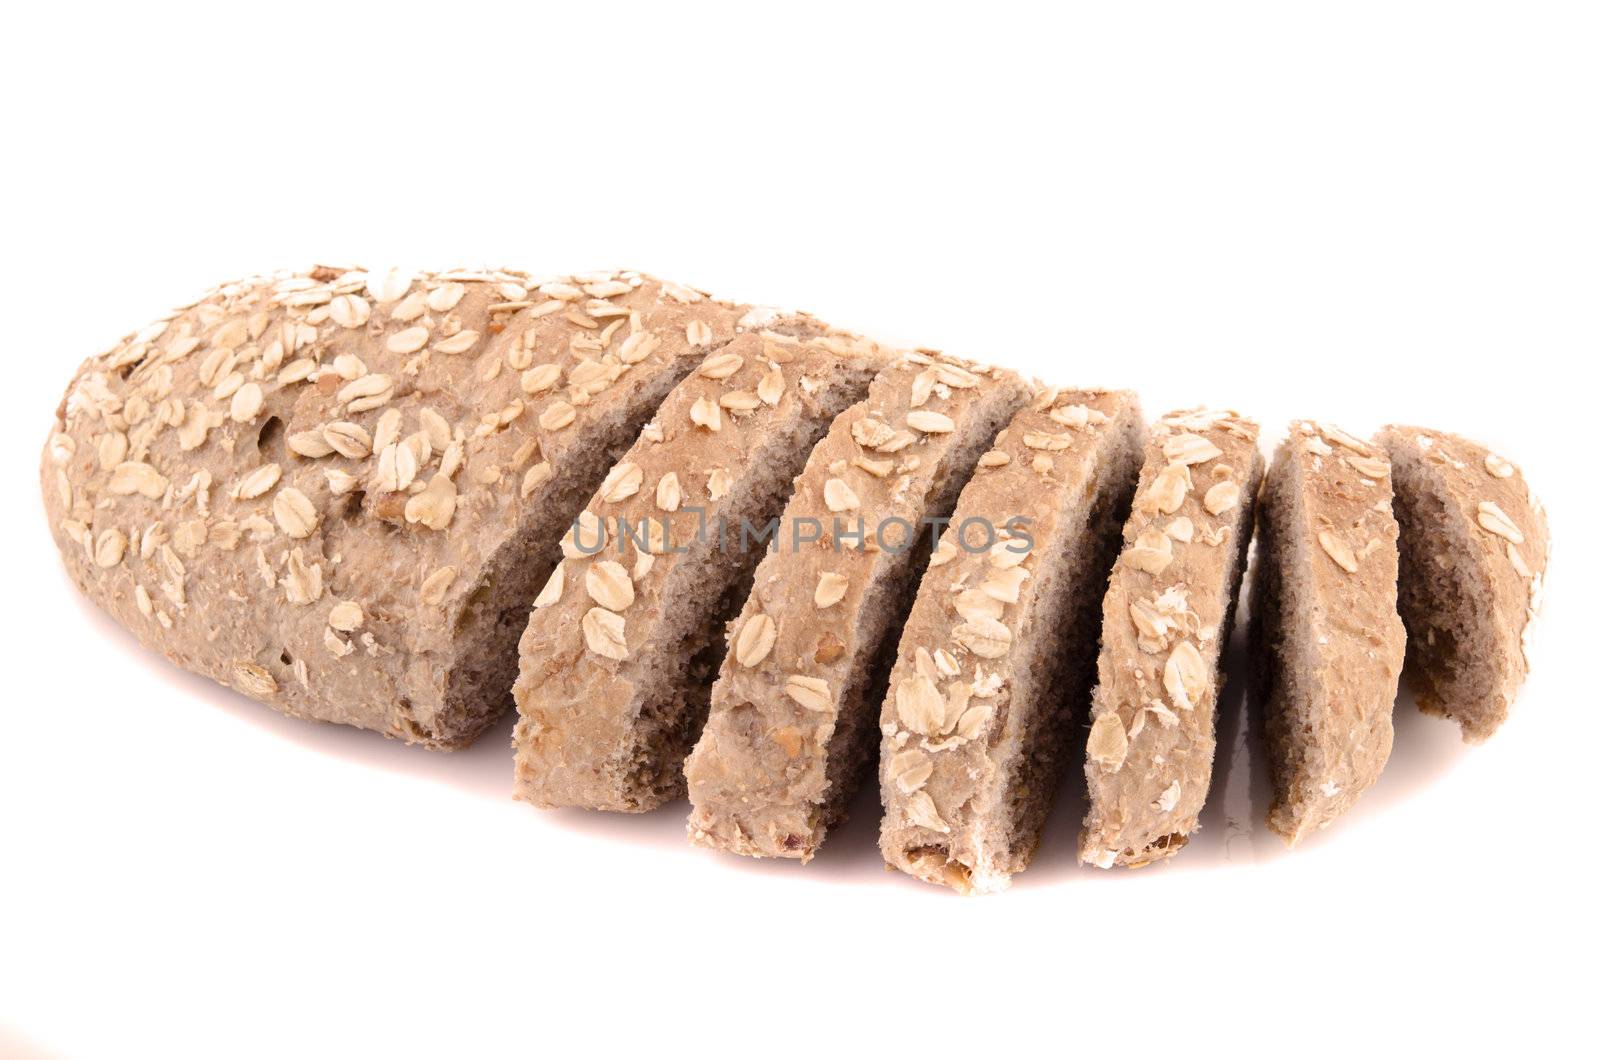 Organic Oats Loaf on white background 